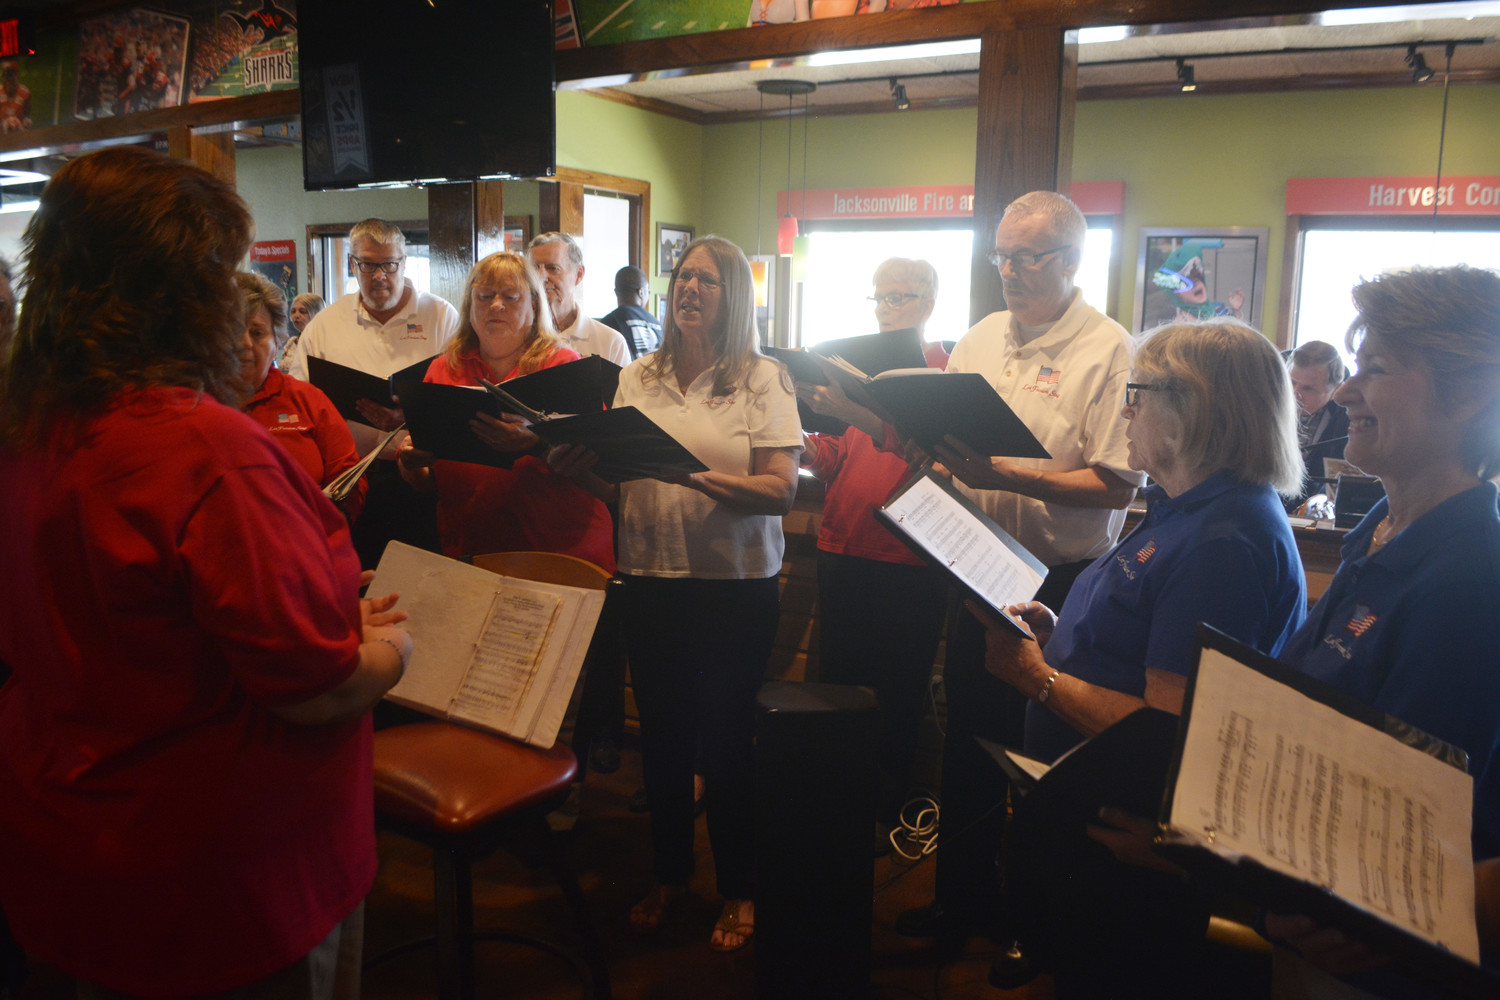 The “Let Freedom Ring Chorus” sings patriotic songs at the event.